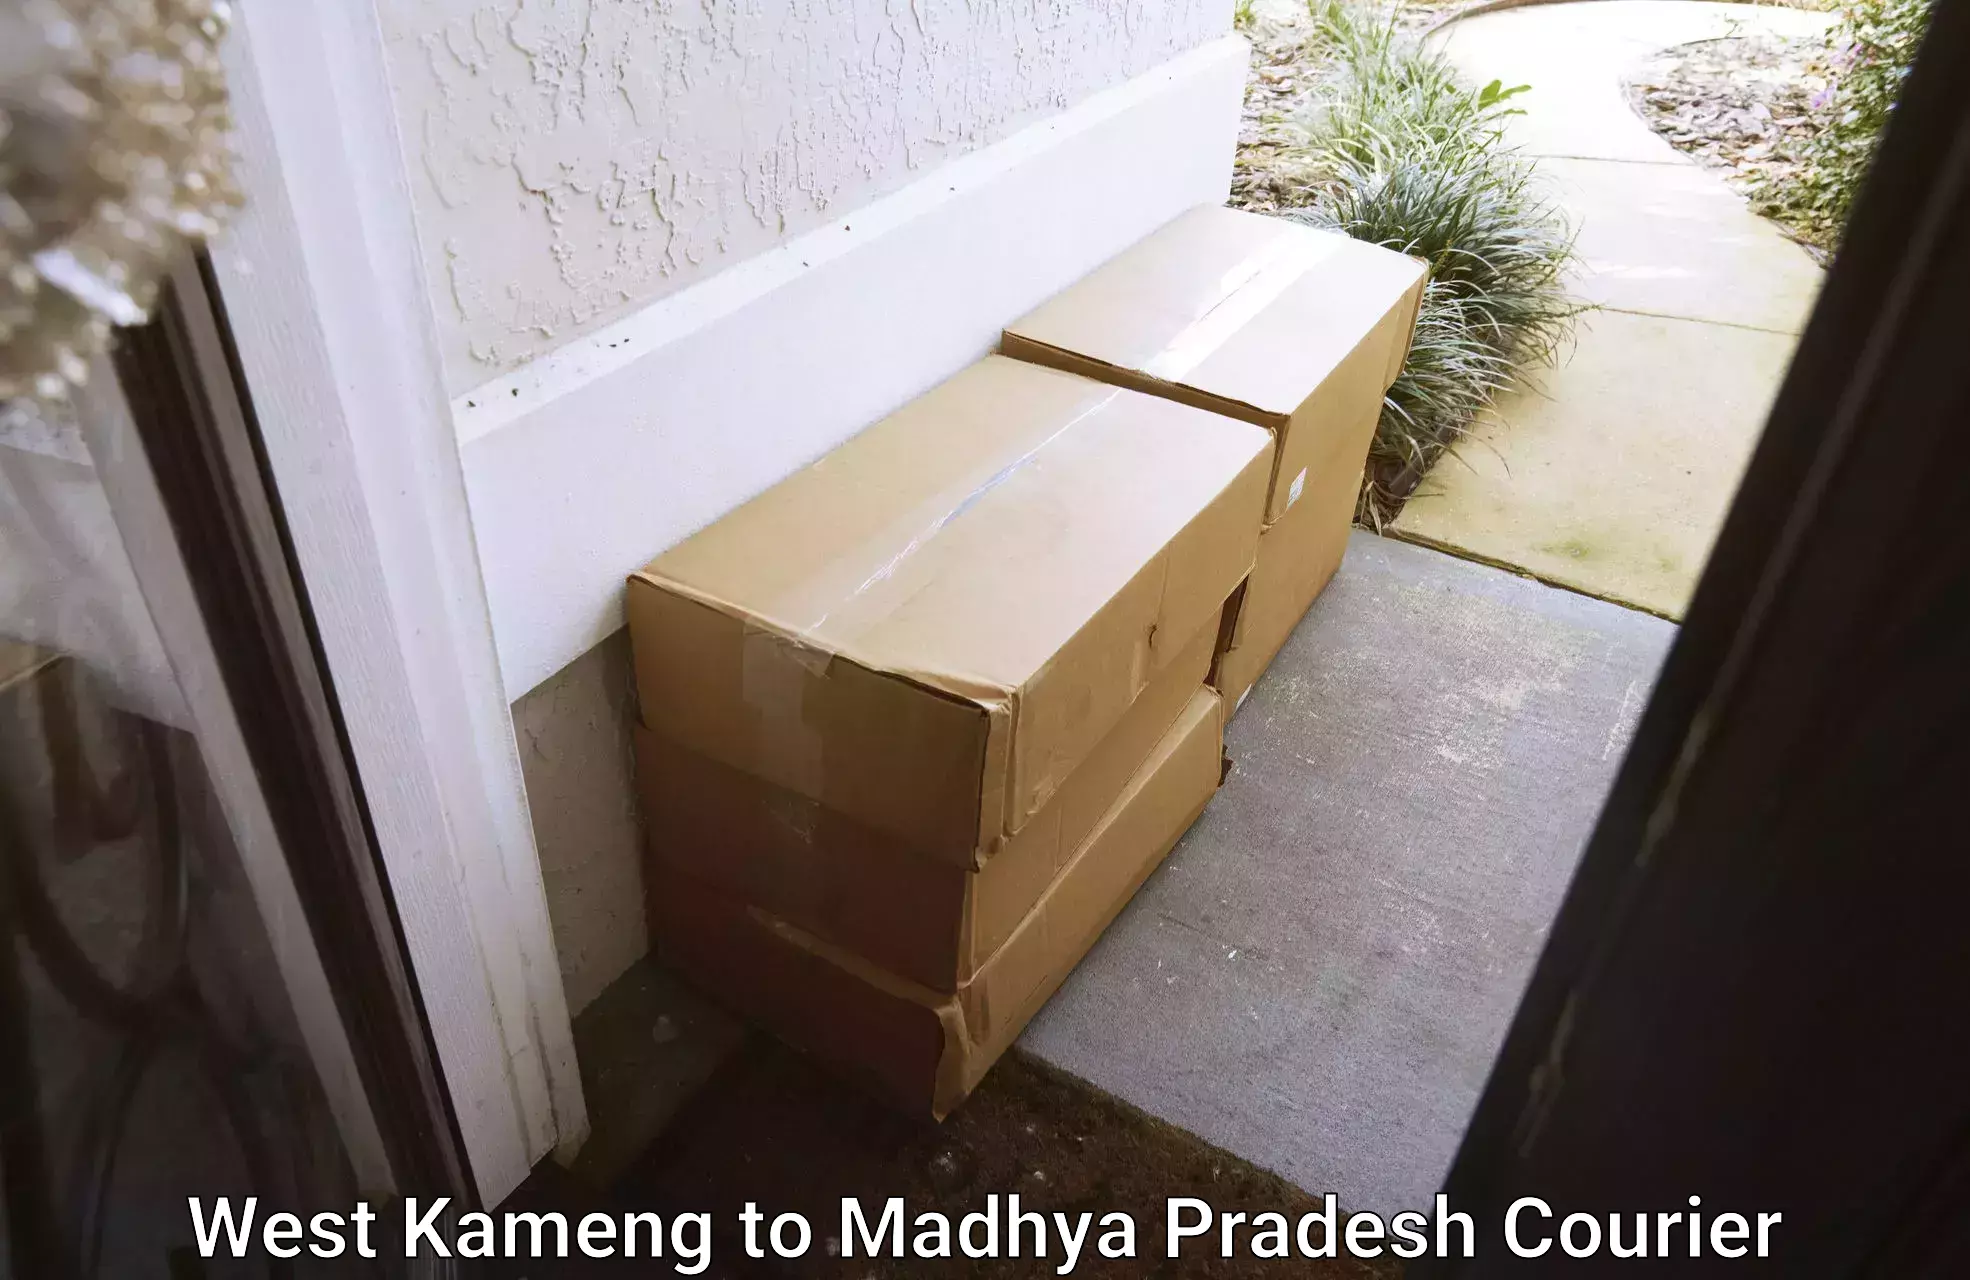 Speedy delivery service West Kameng to Bareli